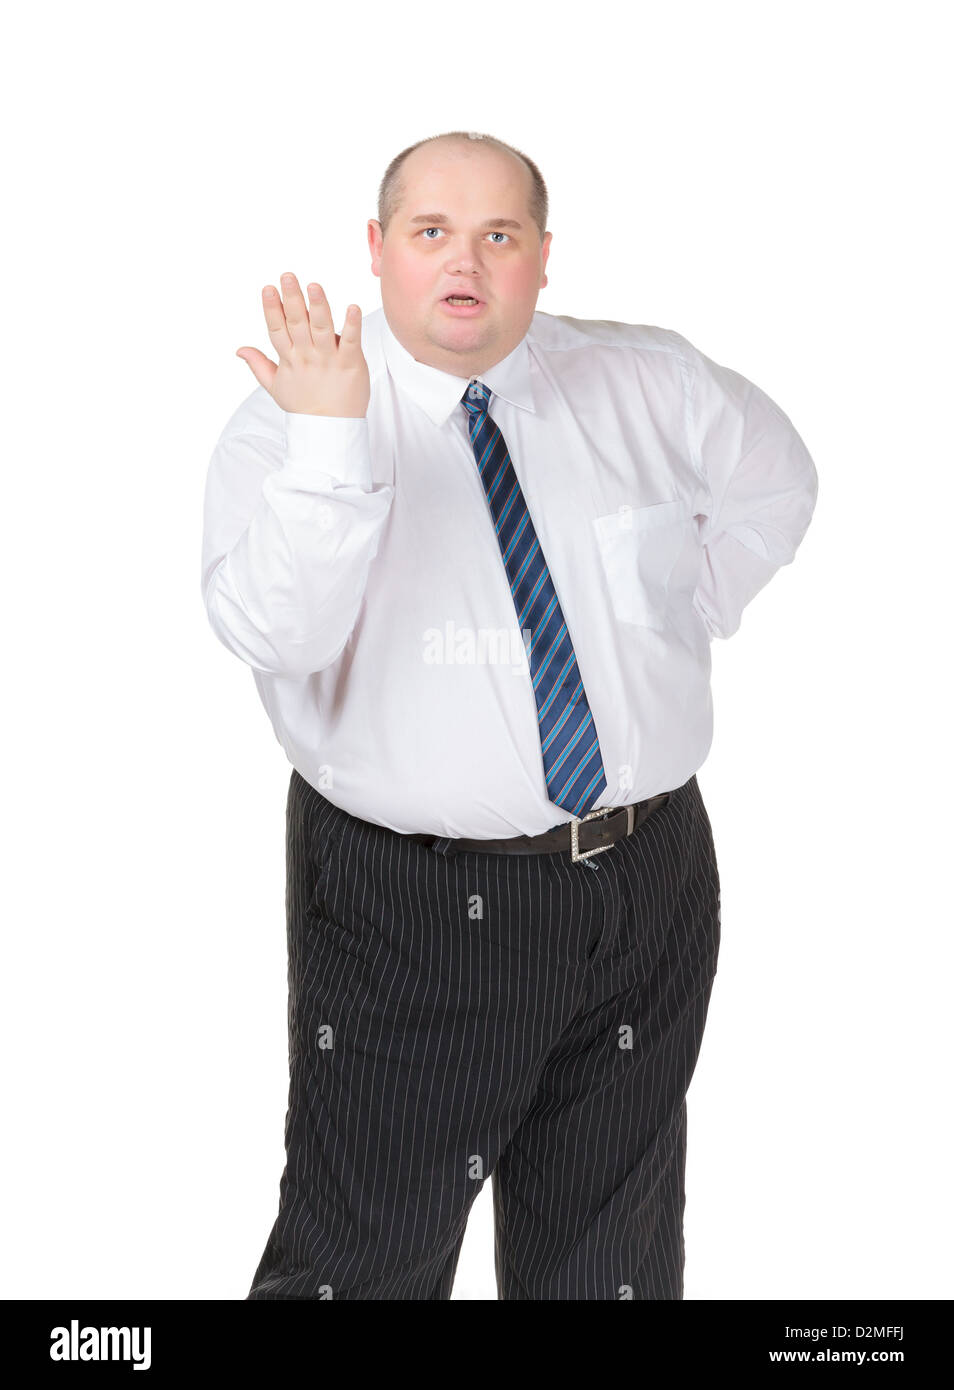 Obese businessman in a shirt and tie making gesturing, isolated on white Stock Photo